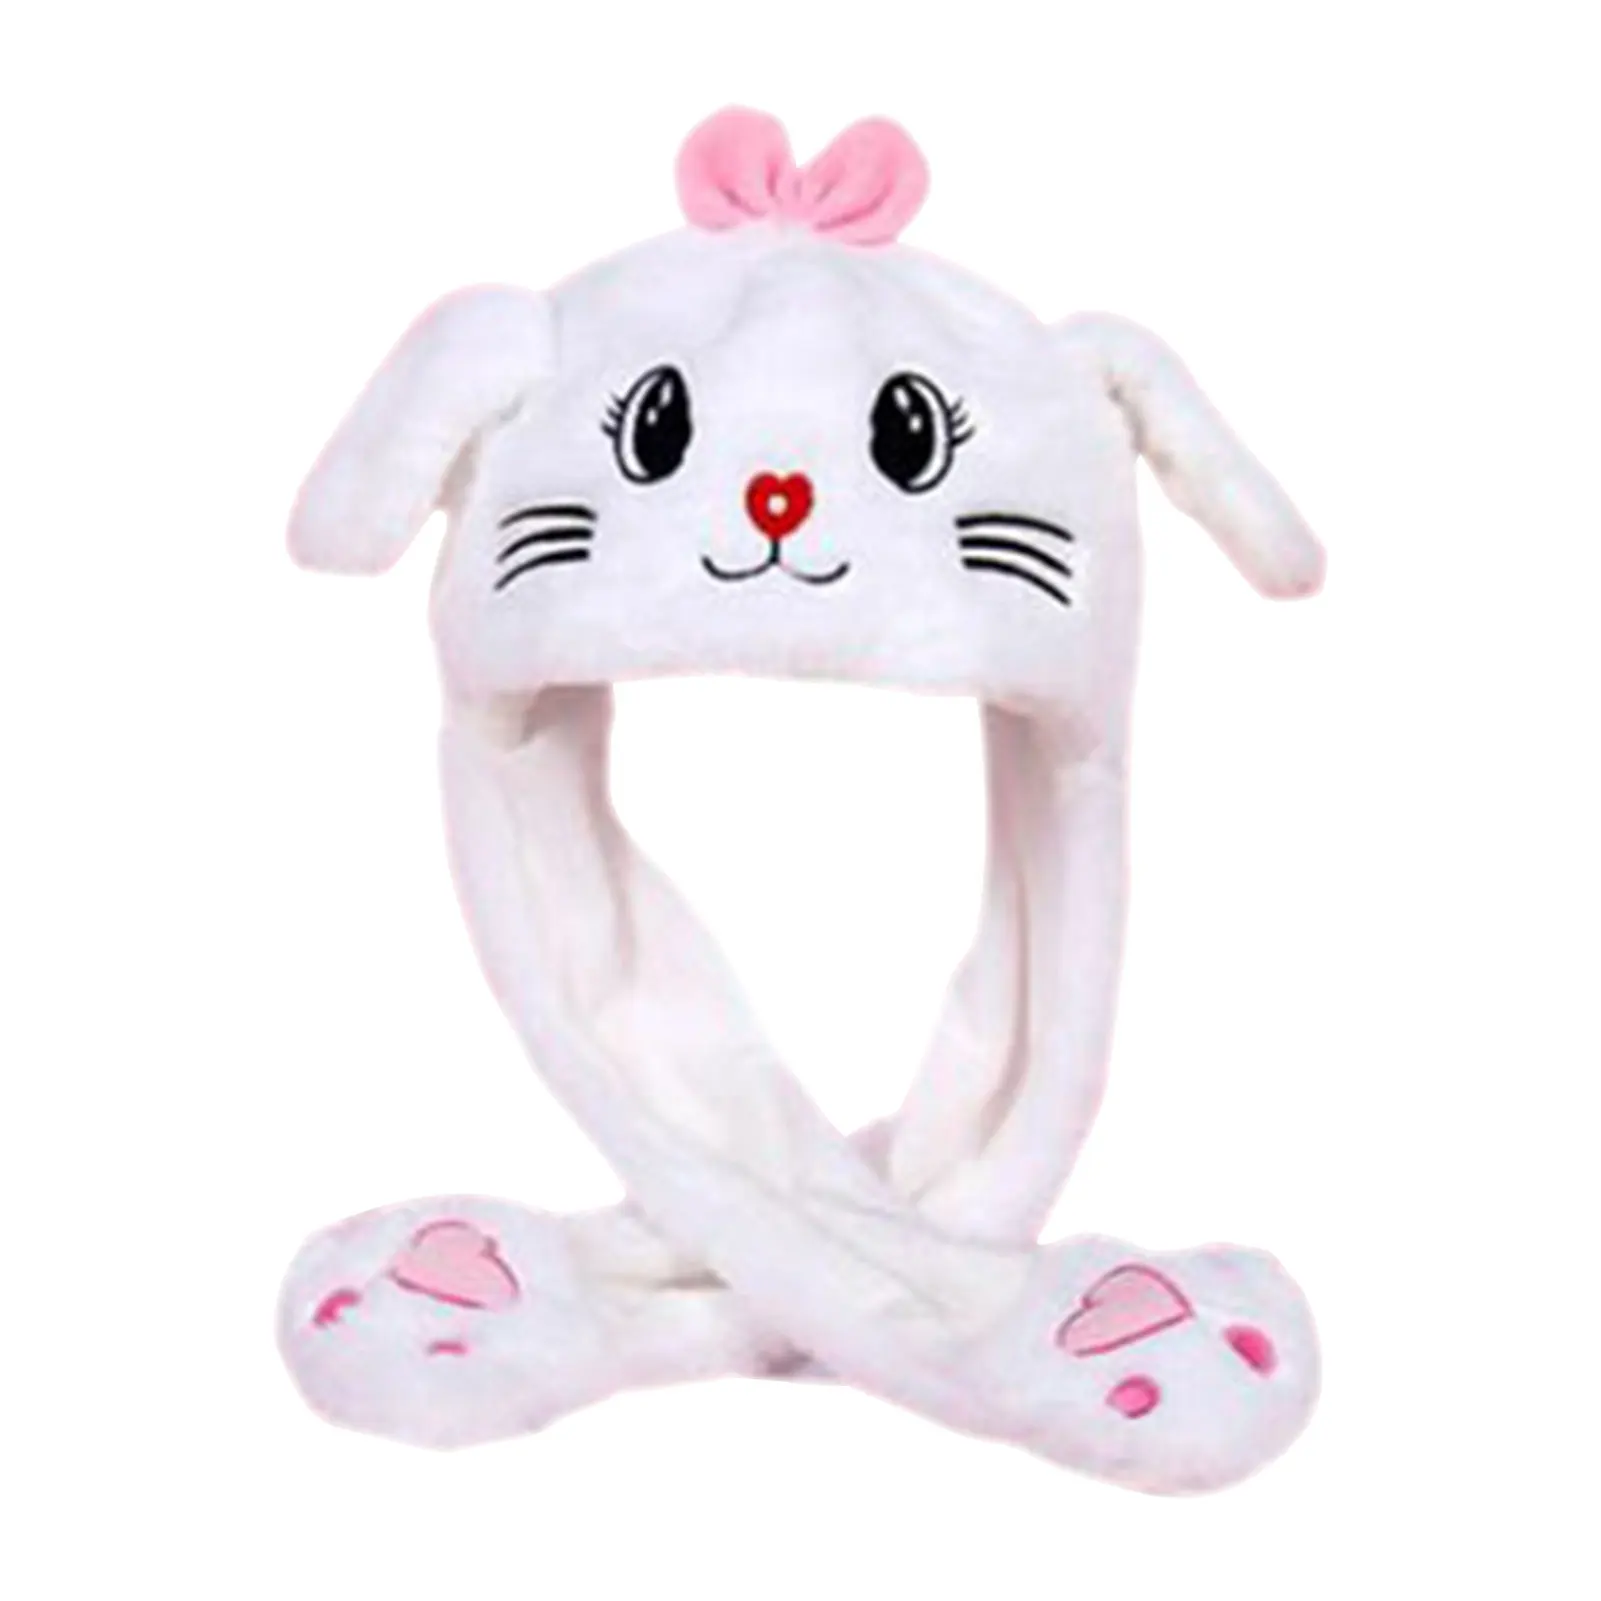 Lovely Moving Bunny Ears Hat Plush Rabbit Hat Funny Play Toy Up Down Moving Bunny Ears Toy Hat Girlfriend Children Girls Gifts cartoon bunny ears hat moving airbag rabbit soft jumping up cap funny toy girls cartoon kawaii plush hat toys for adult kid gift